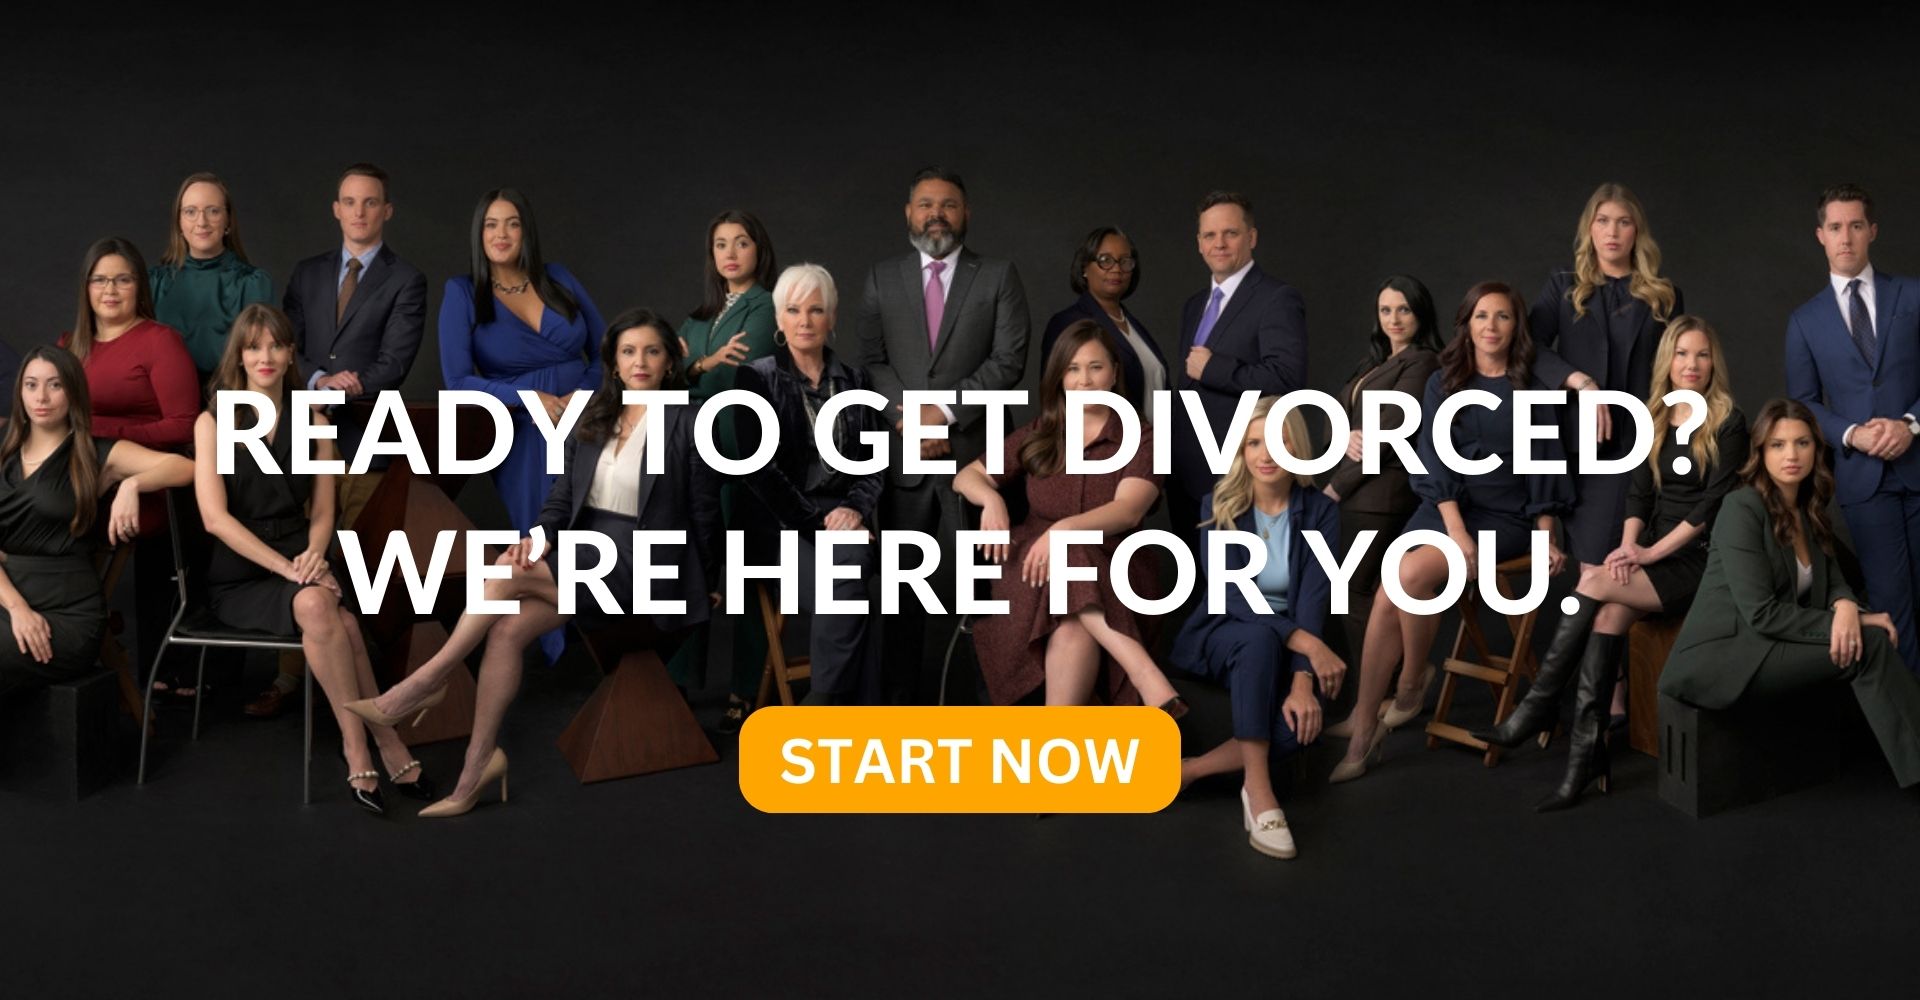 Are you ready to get divorced?